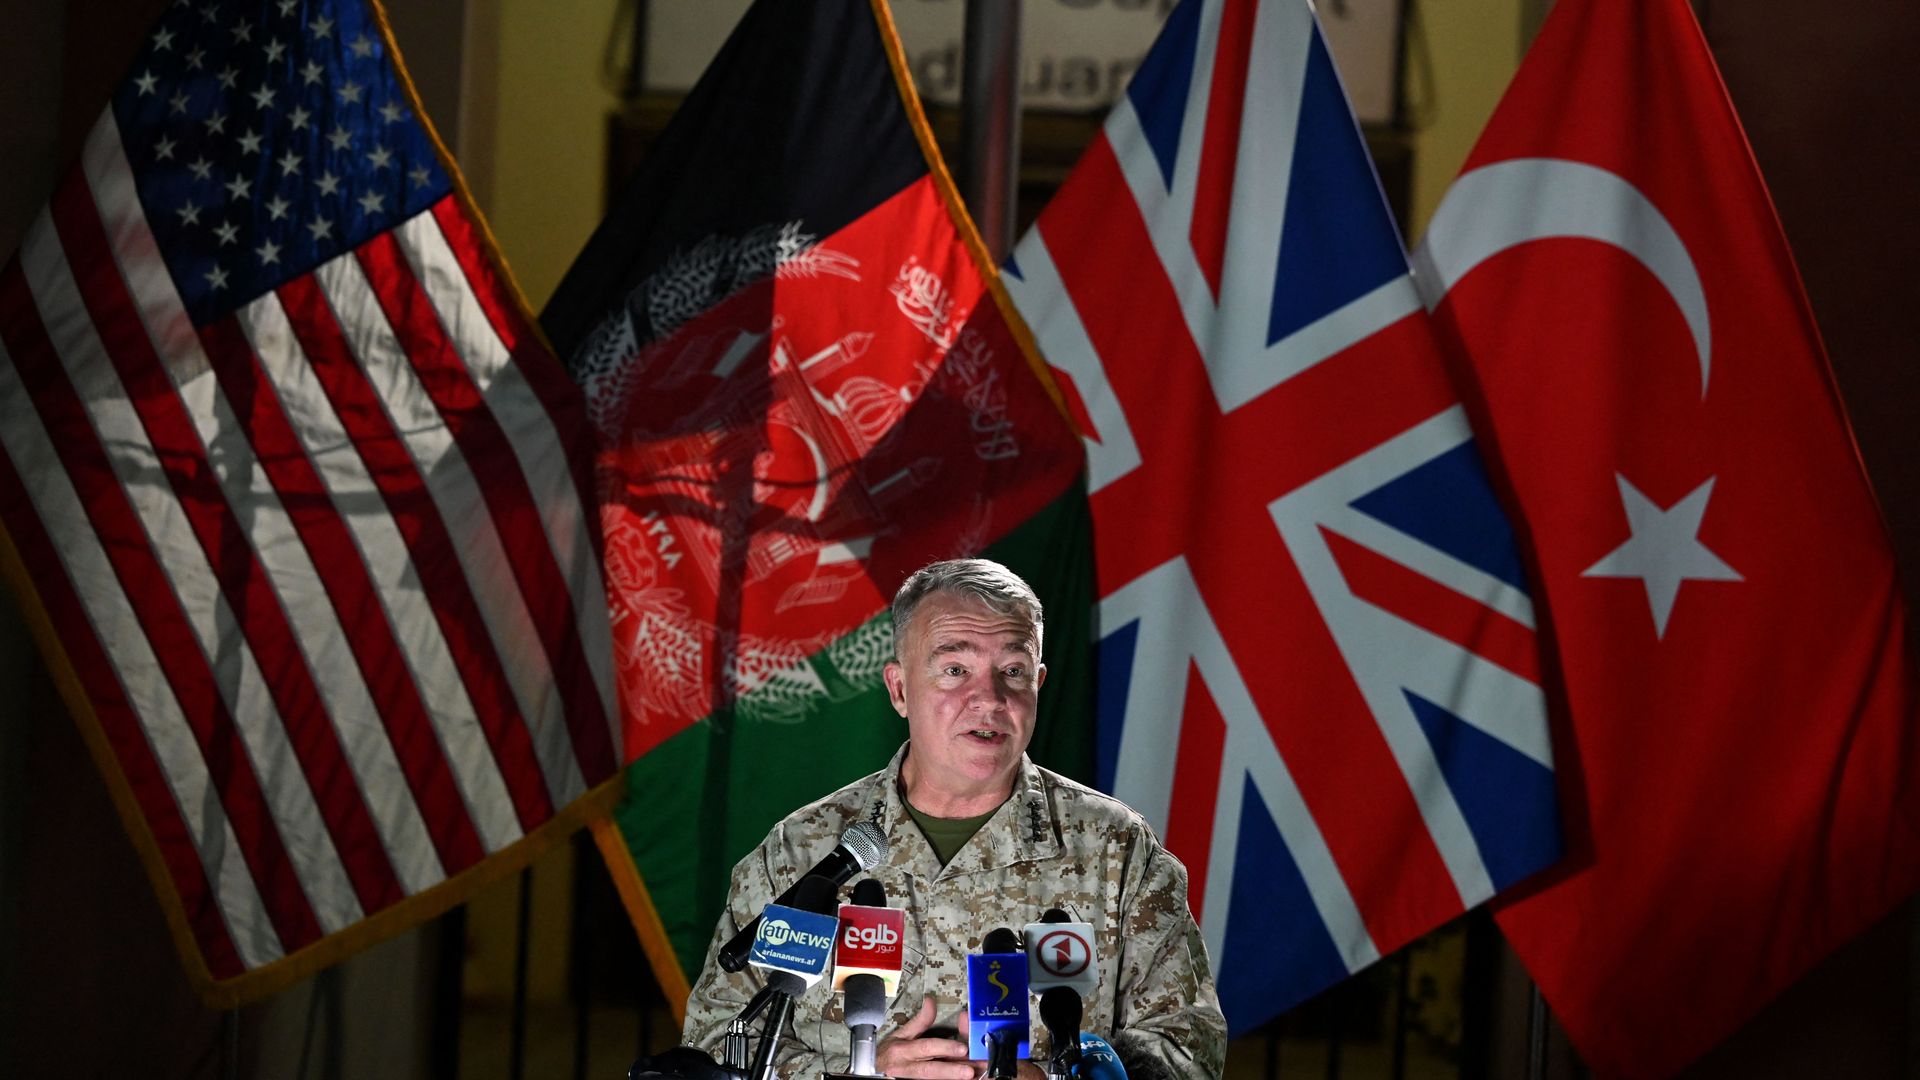 Head of the US Central Command, General Kenneth McKenzie, speaks during a press conference at the former Resolute Support headquarters in the US embassy compound in Kabul on July 25, 2021.